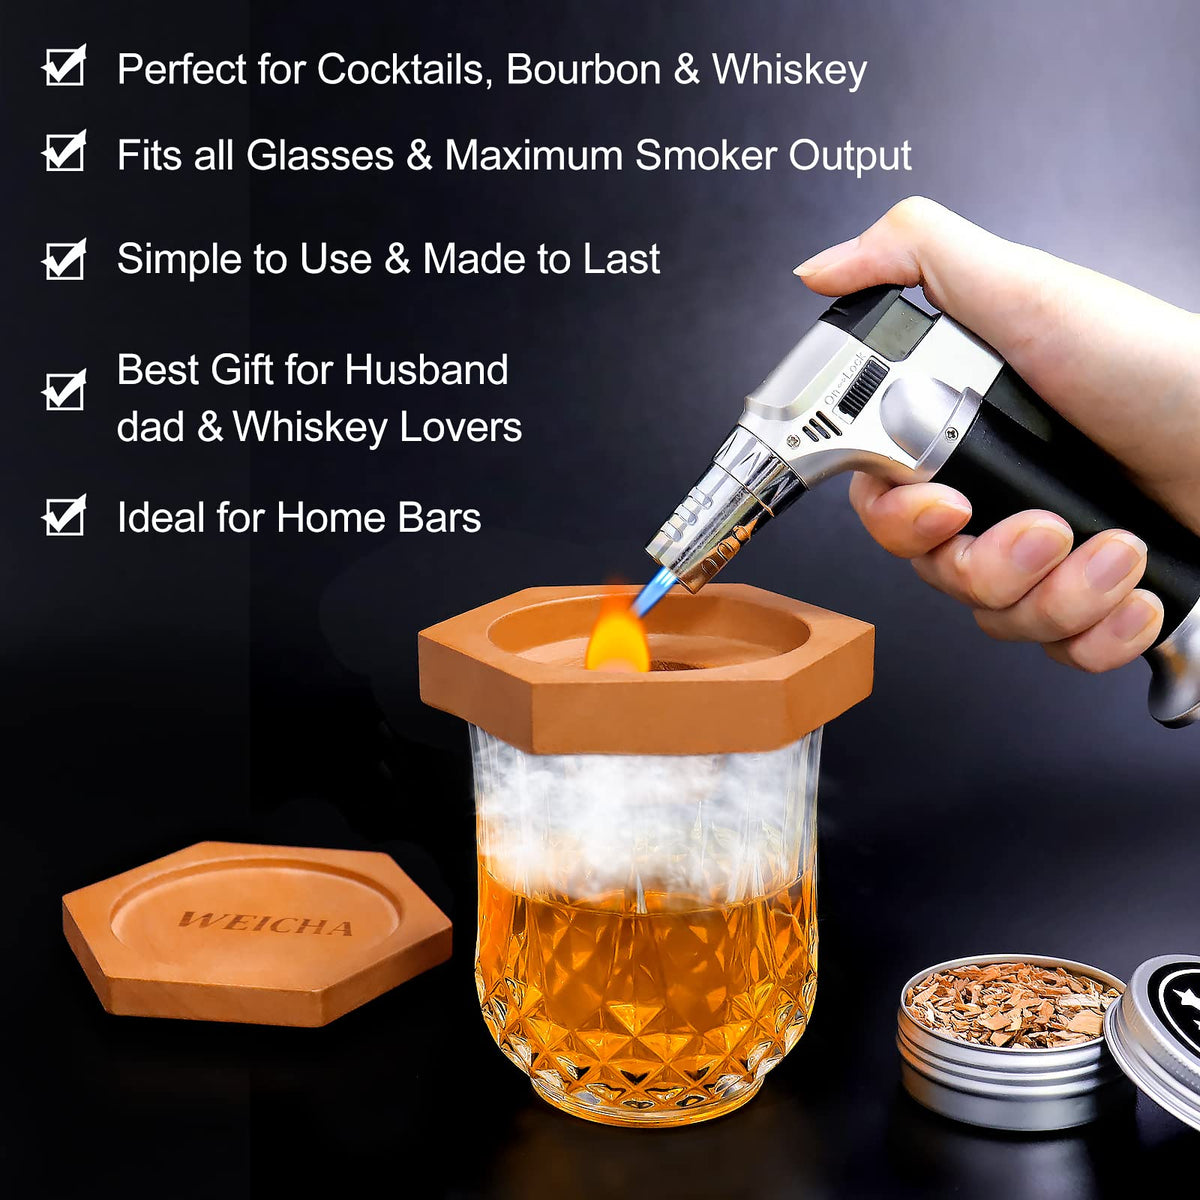 Cocktail Smoker Kit with Torch & Wood Chips - Premium Set, USA Oak Smoker - Old Fashioned Cocktail Kit for Whiskey - Bourbon Gifts for Men - Gift from